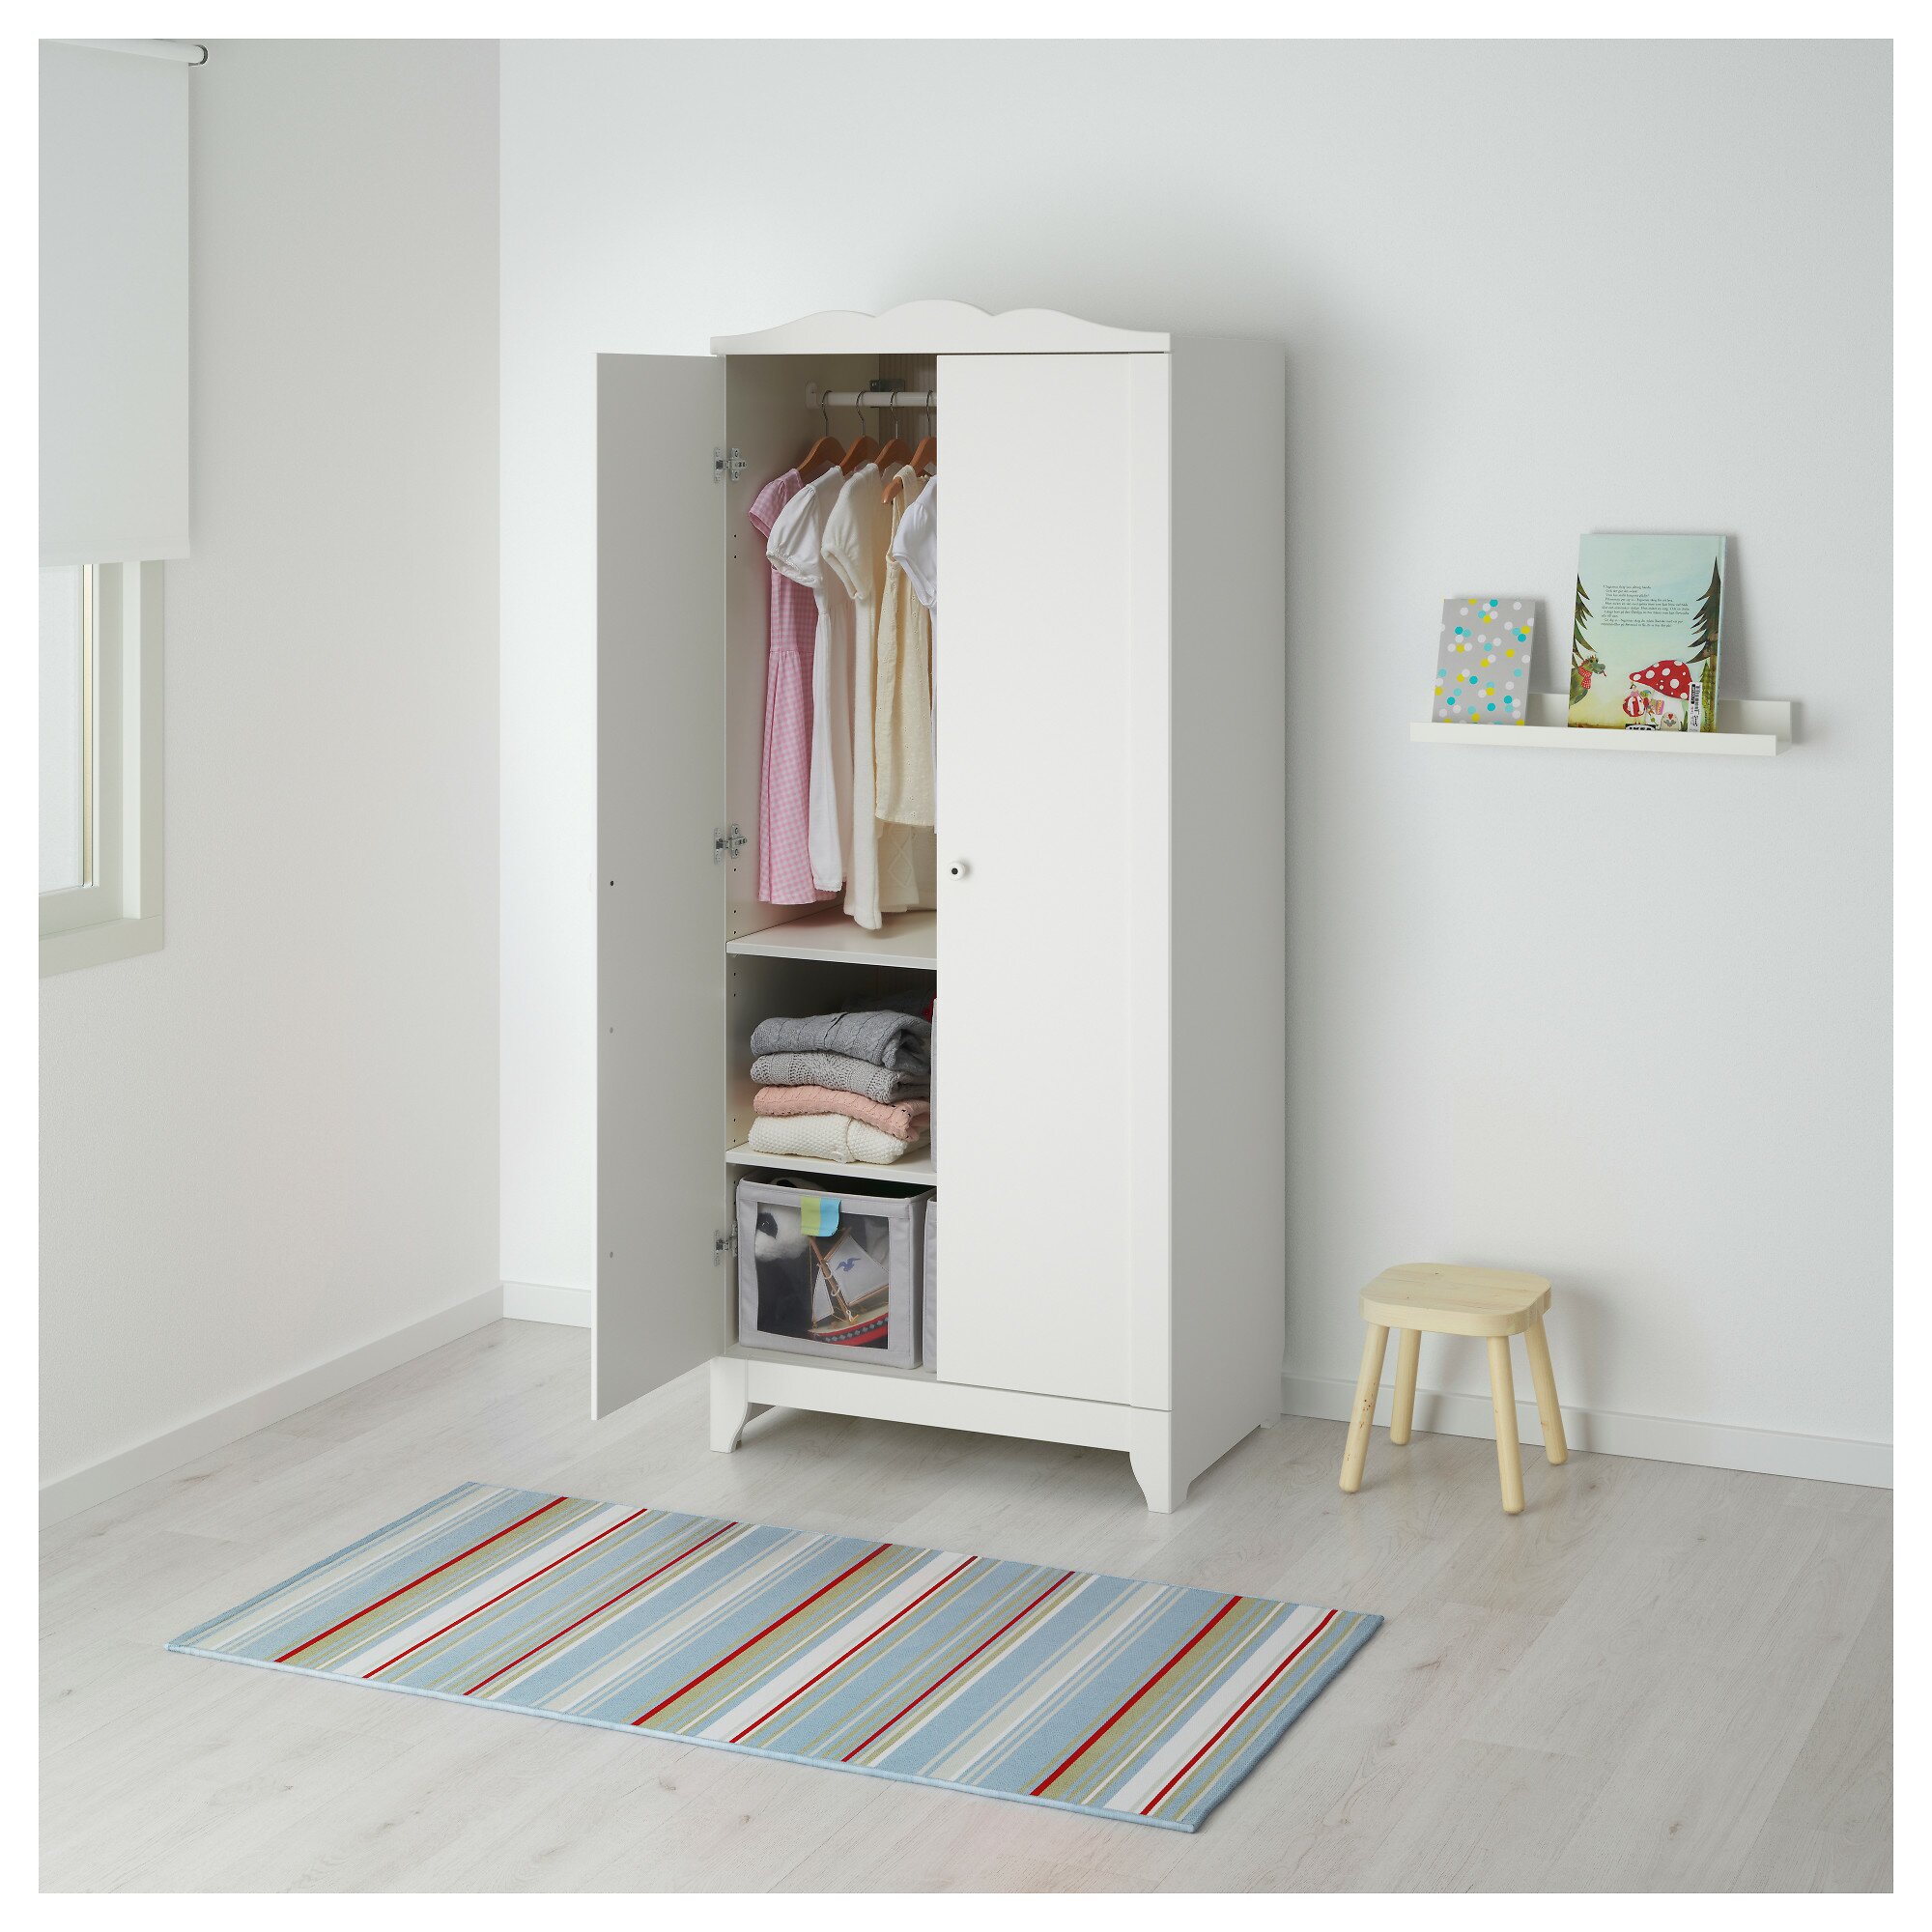 Elegant Bedroom Cabinet Design with Armoire Ikea: Large Armoire For Sale | Clothing Armoire Ikea | Armoire Ikea